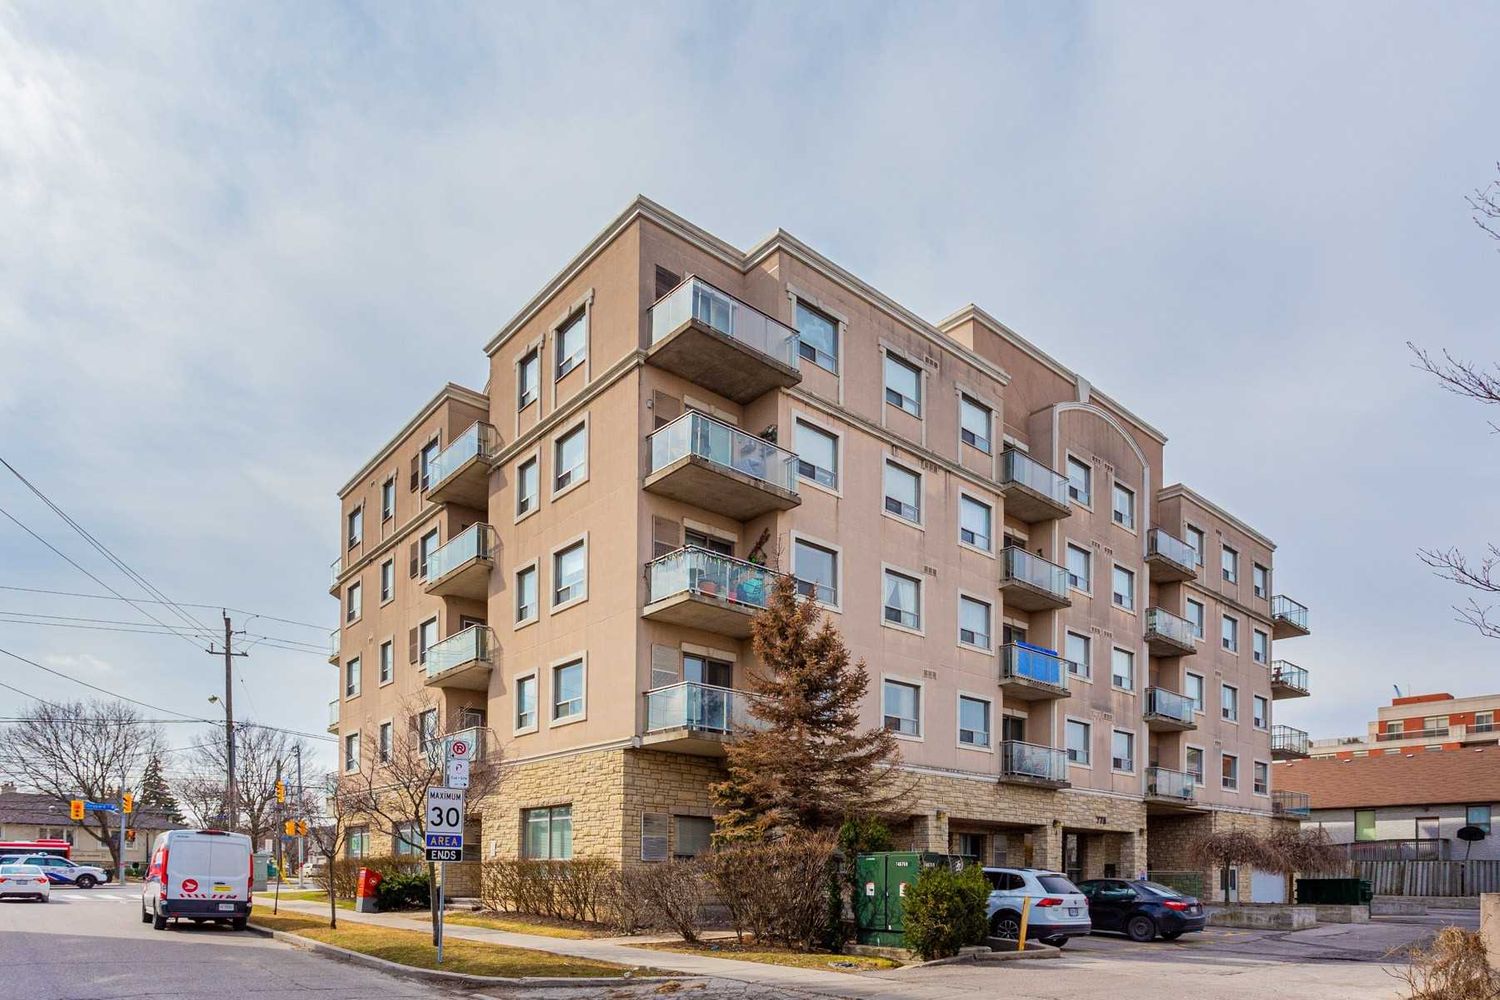 778 Sheppard Avenue W. 778 Sheppard Avenue West Condos is located in  North York, Toronto - image #3 of 3